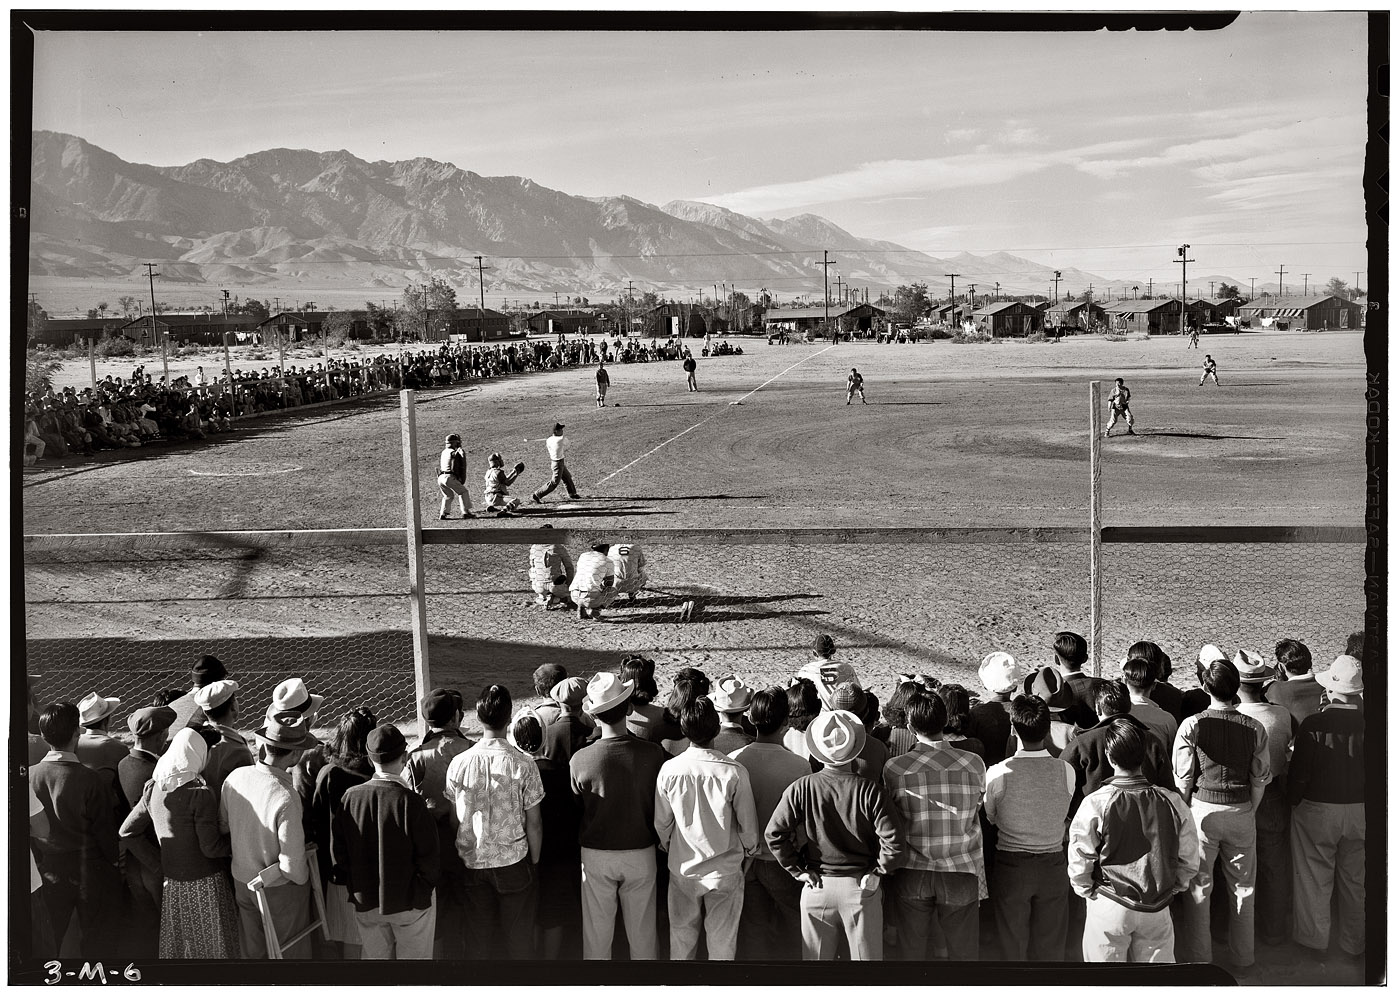 A baseball game against the backdrop of the Sierra Nevada at the Manzanar Relocation Center, 1943. View full size. Photograph by Ansel Adams.